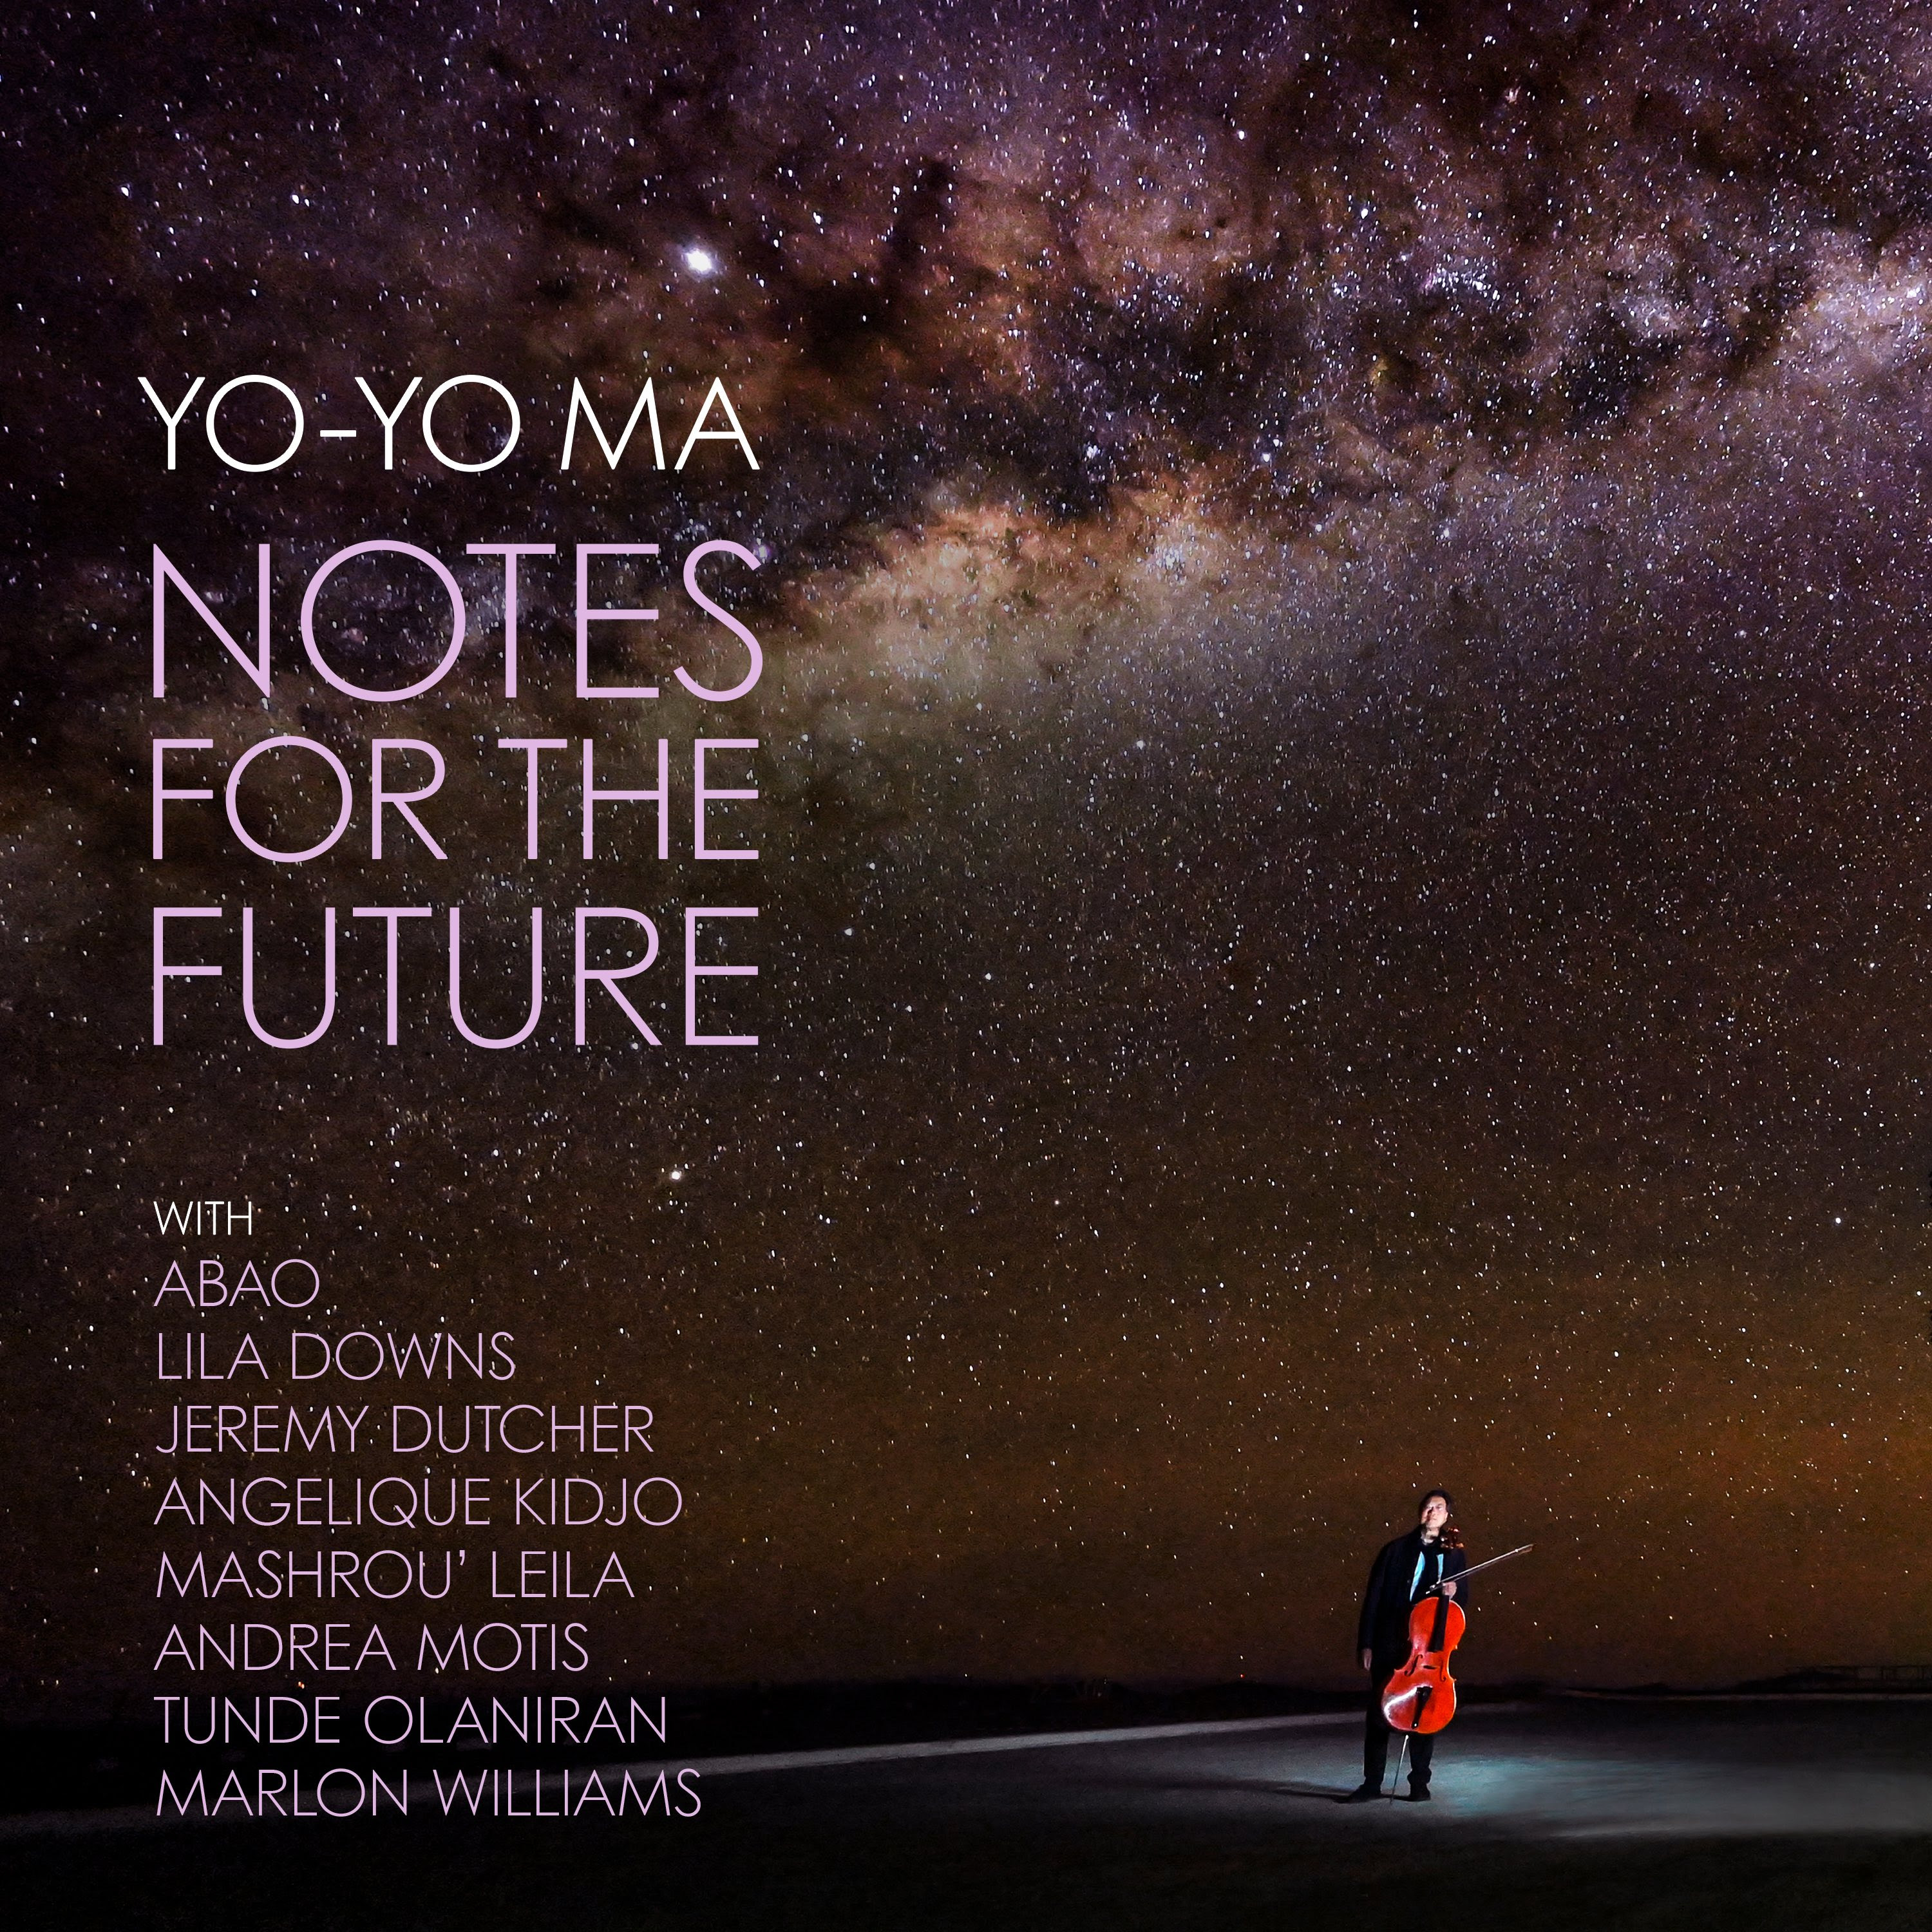 YYM-Notes For The Future-Album cover copy.jpg